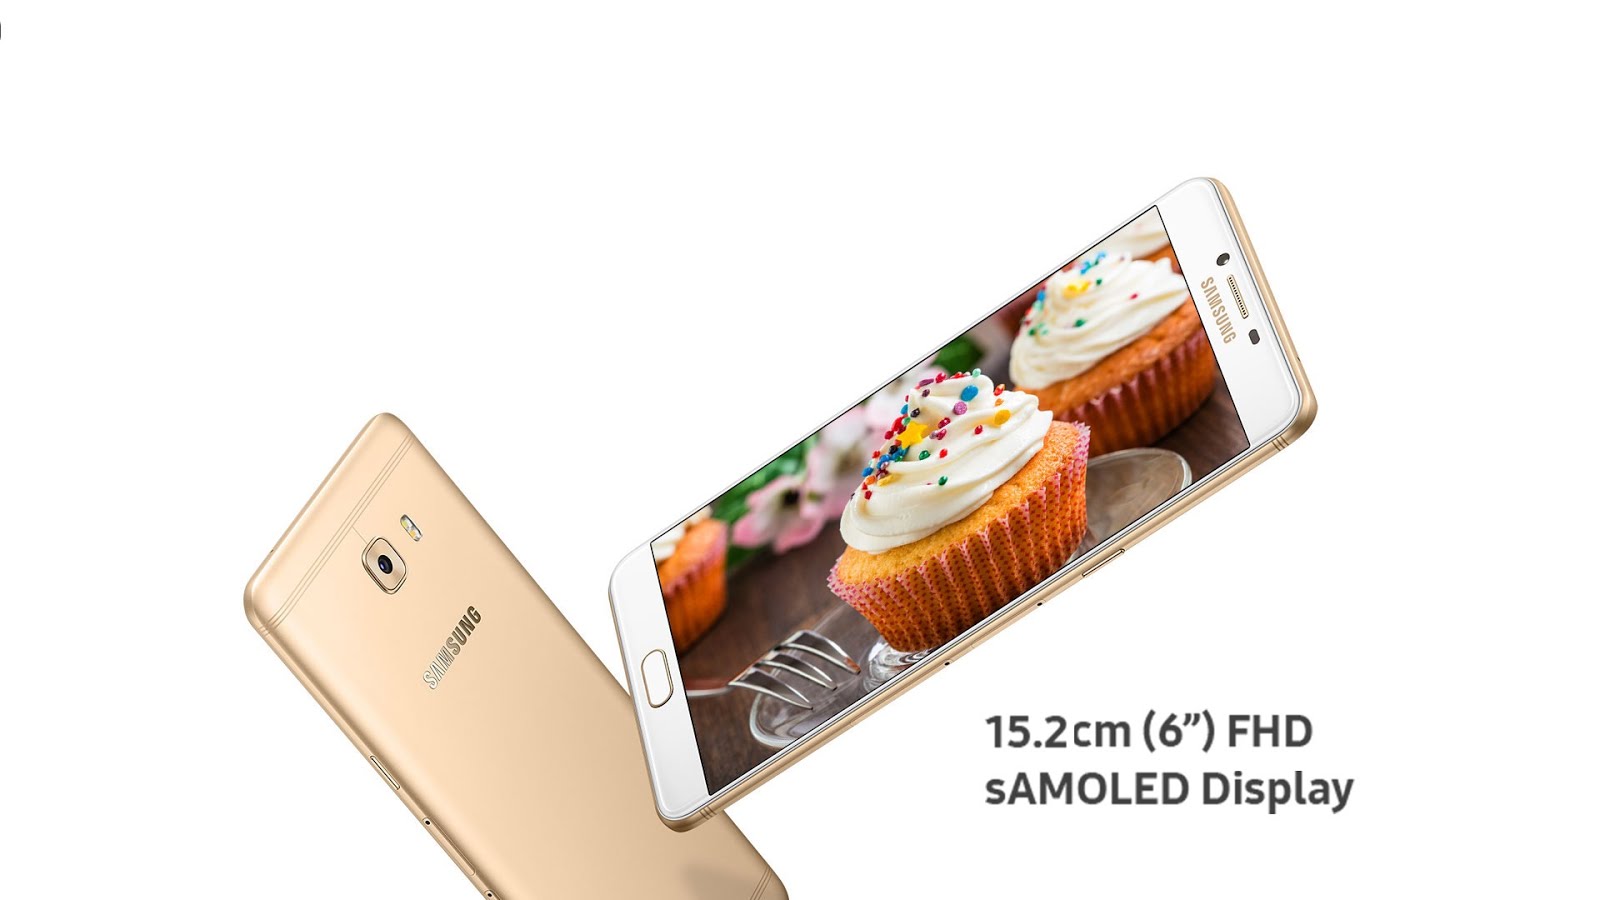 The Samsung Galaxy C9 Pro Is Priced At RM2299, Available From 10th ...